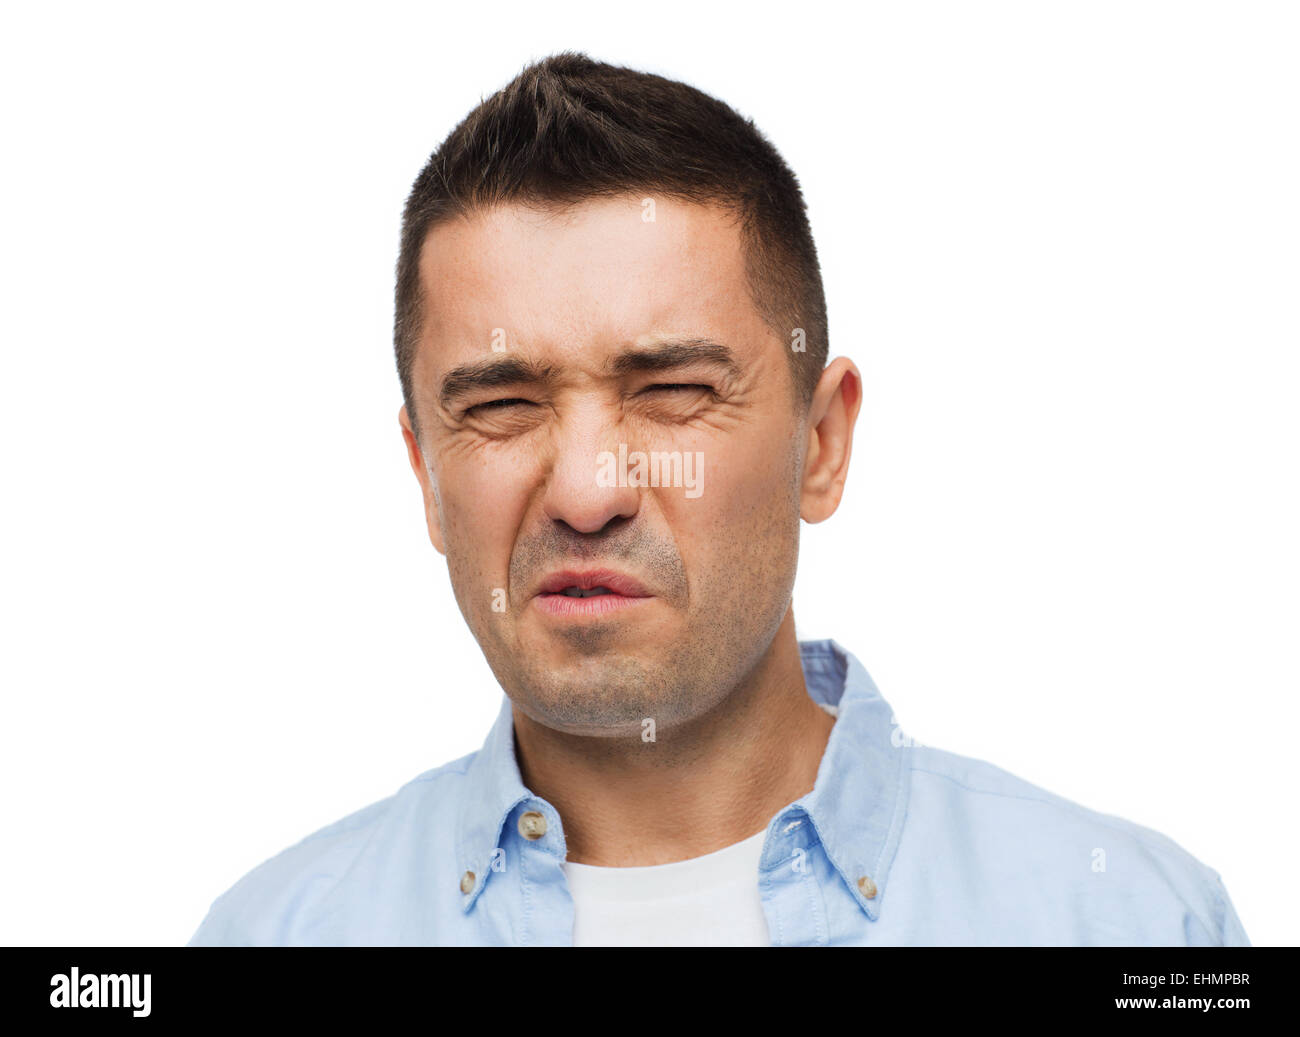 man wrying of unpleasant smell Stock Photo